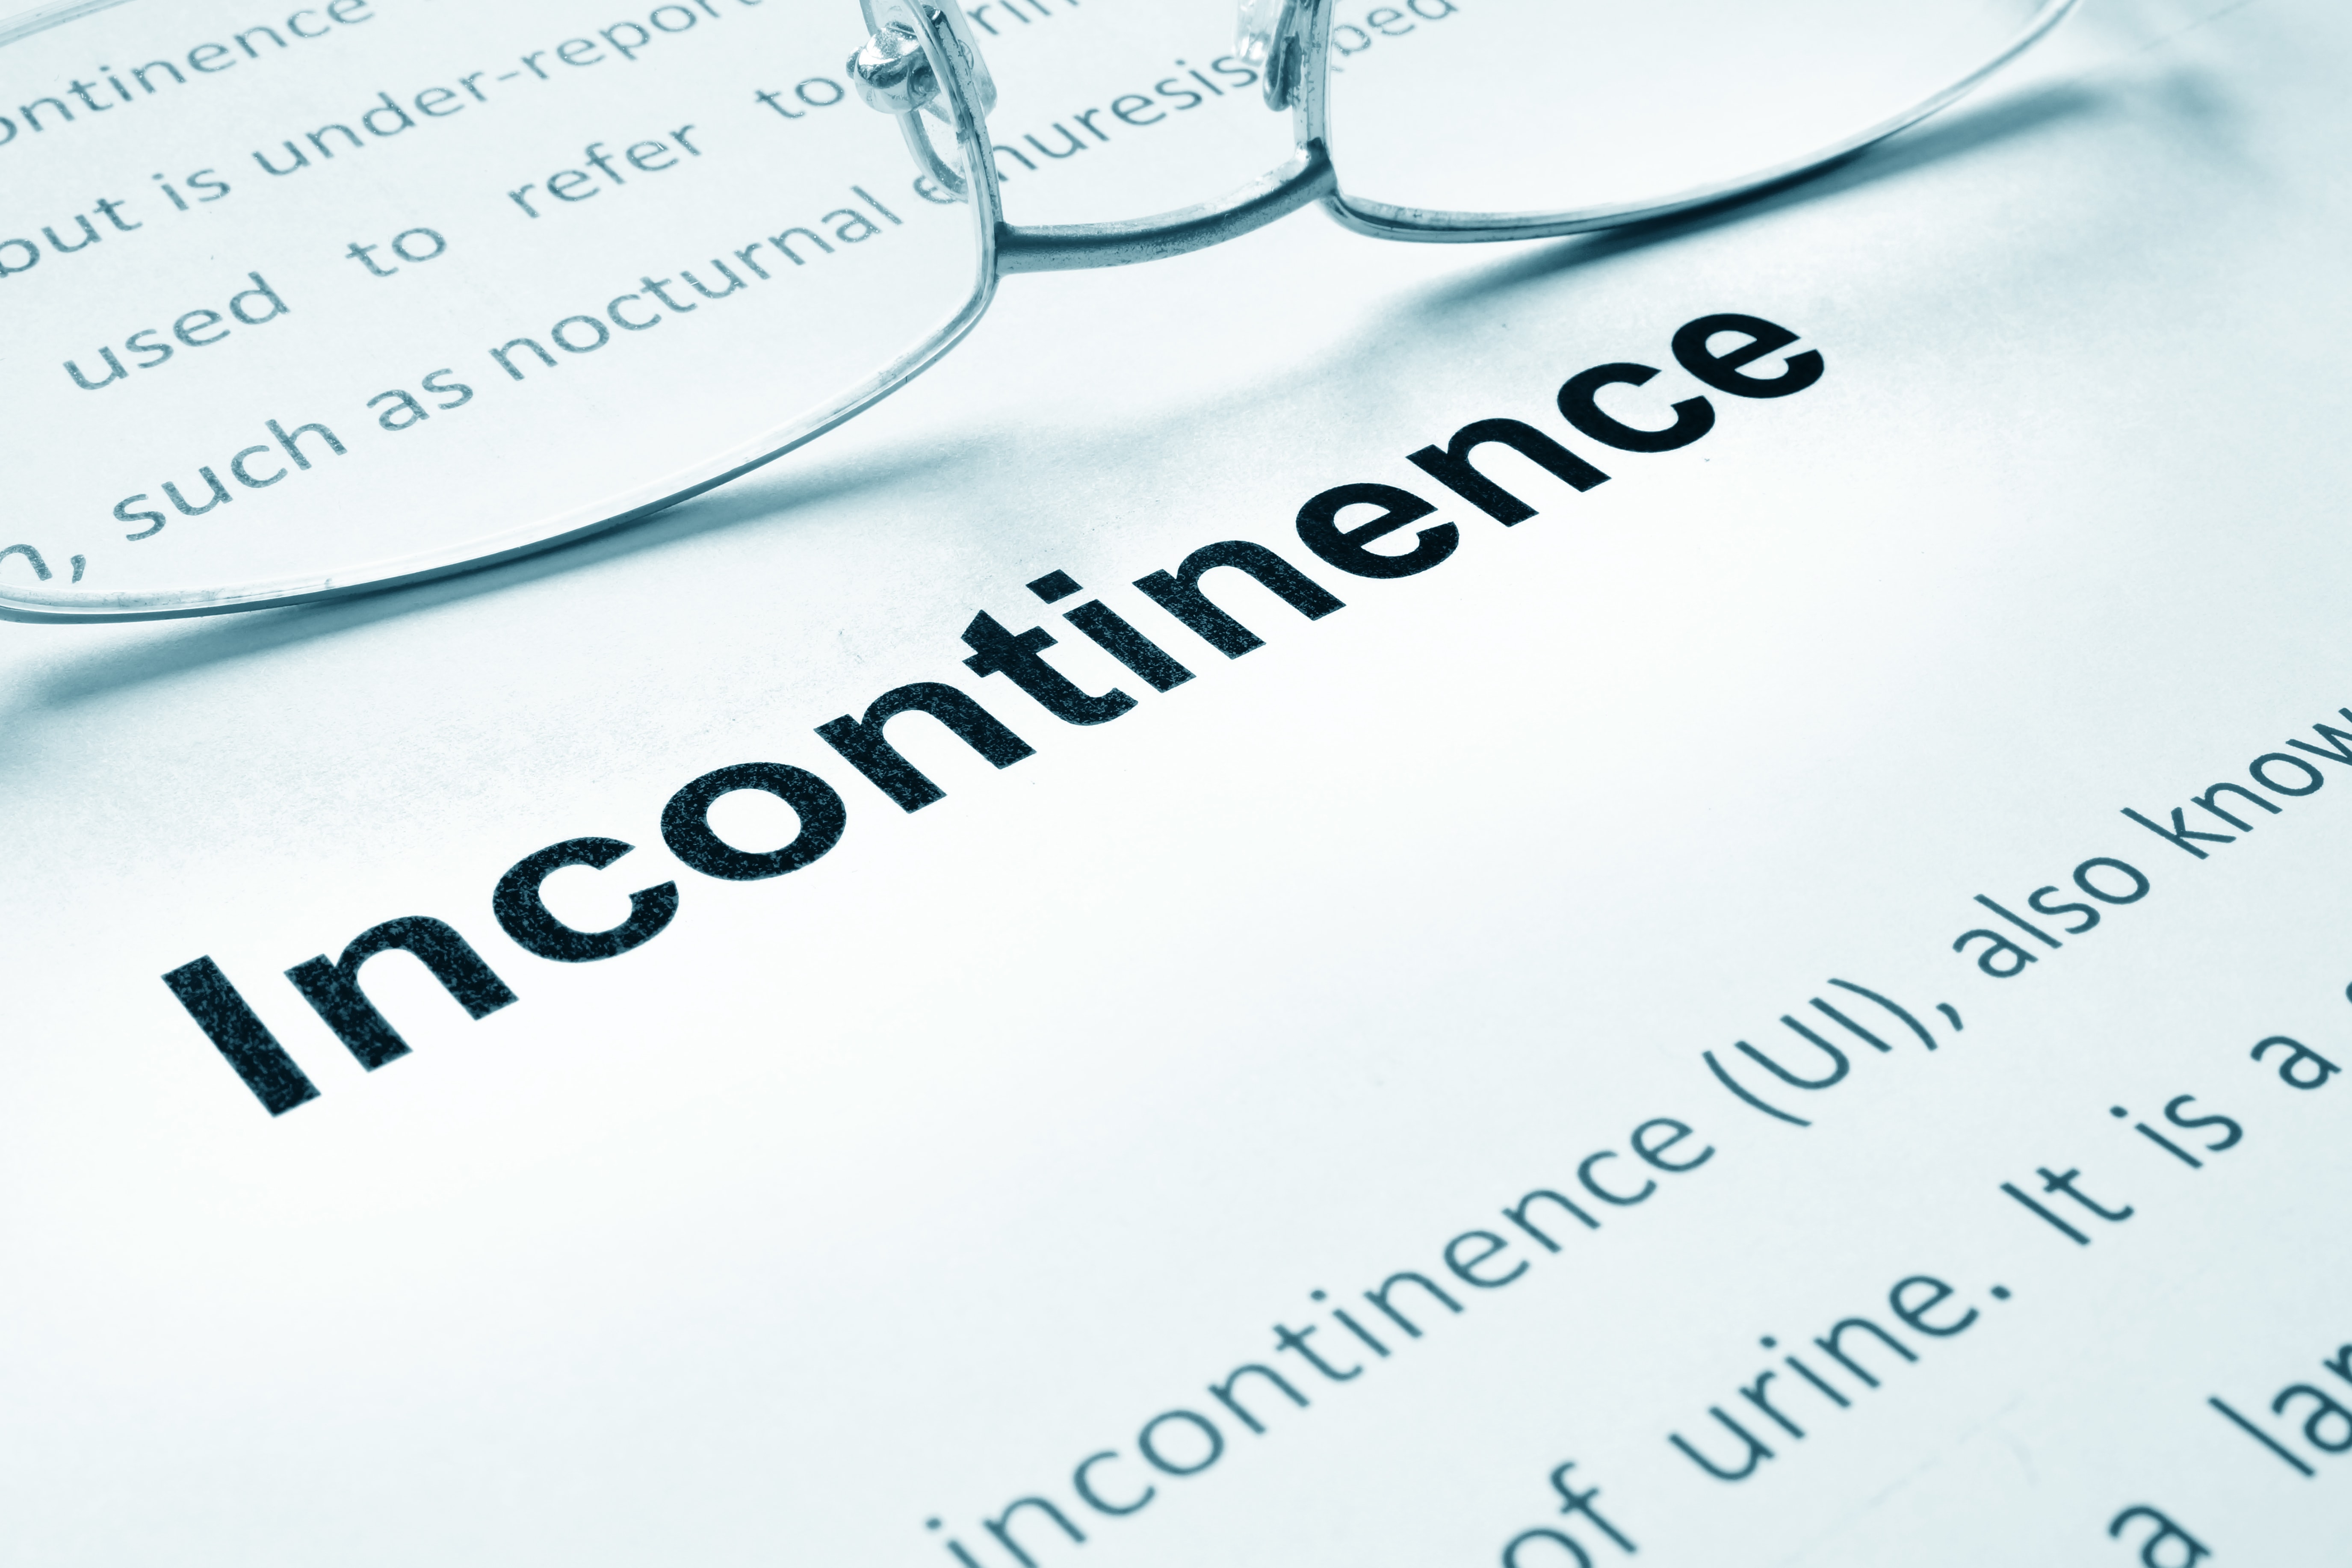 incontinence